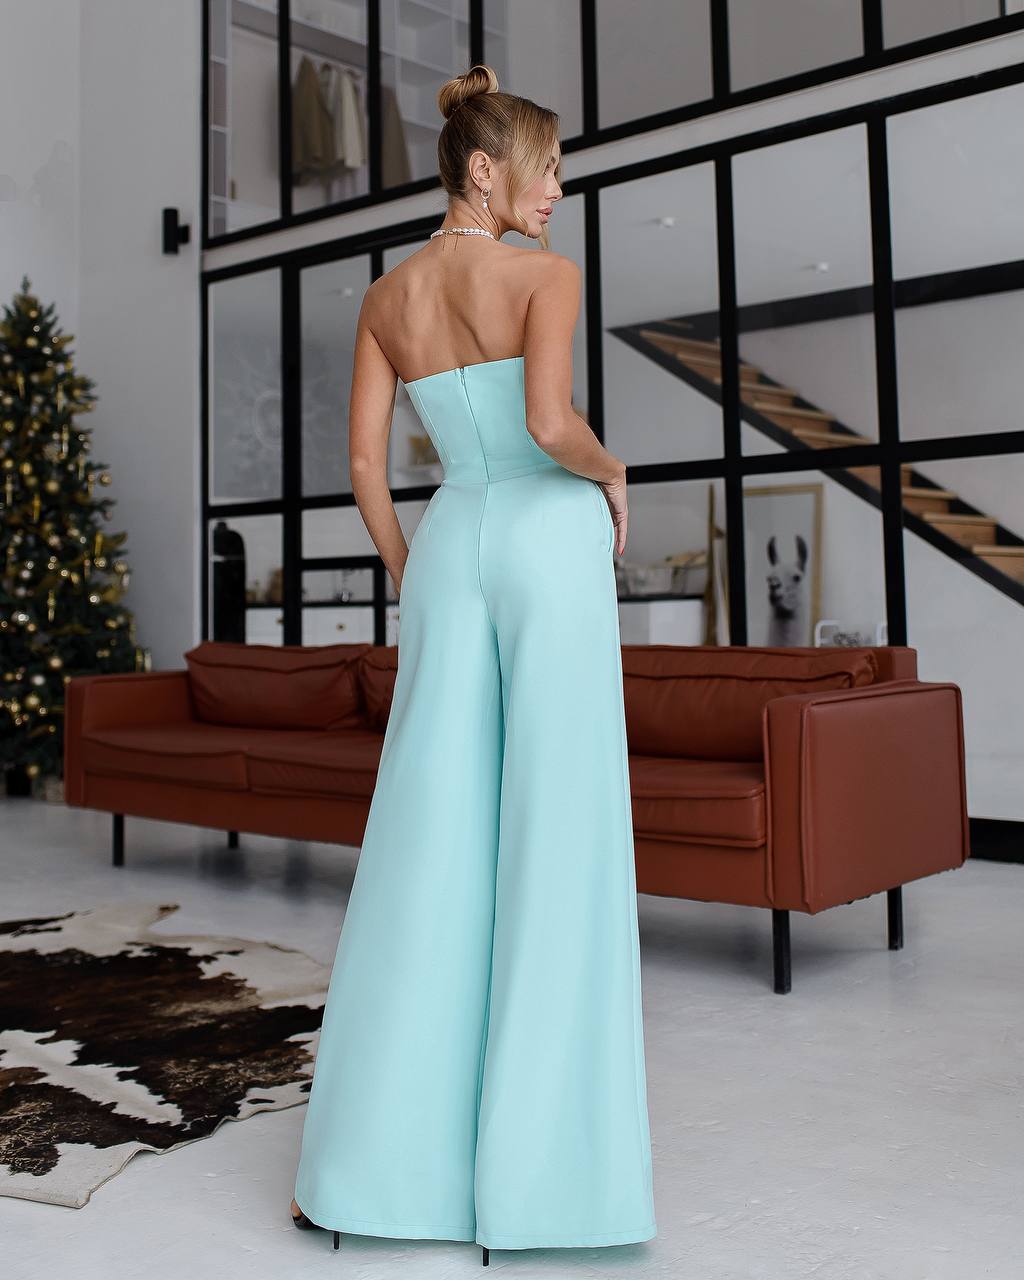 a woman in a strapless blue jumpsuit standing in a living room